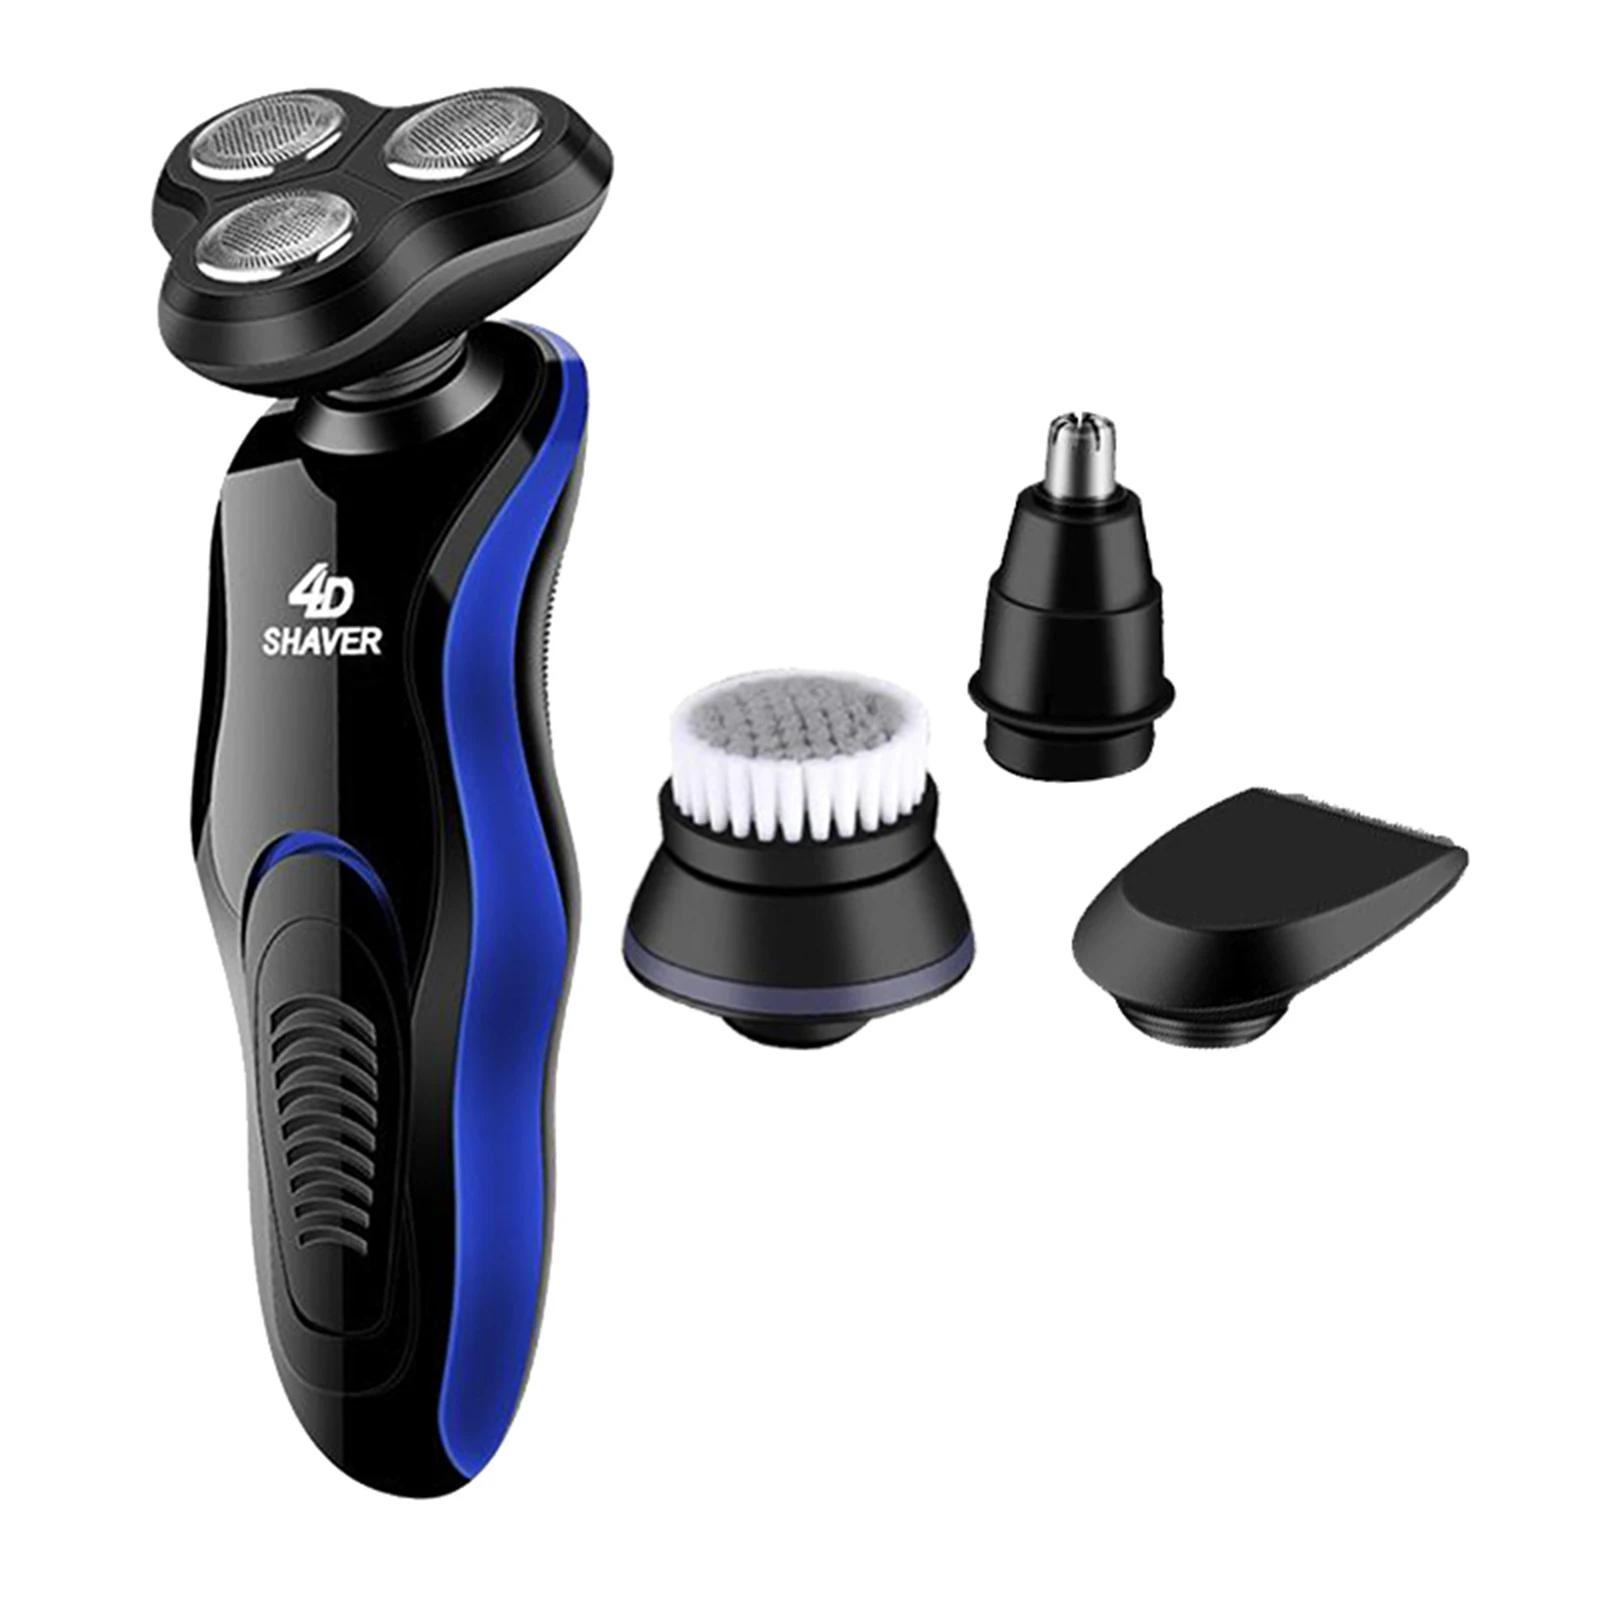 Electric Razor Shaver for Men Rechargeable Cordless Shavers Wet & Dry Razors for Shaving Trimmer, Waterproof